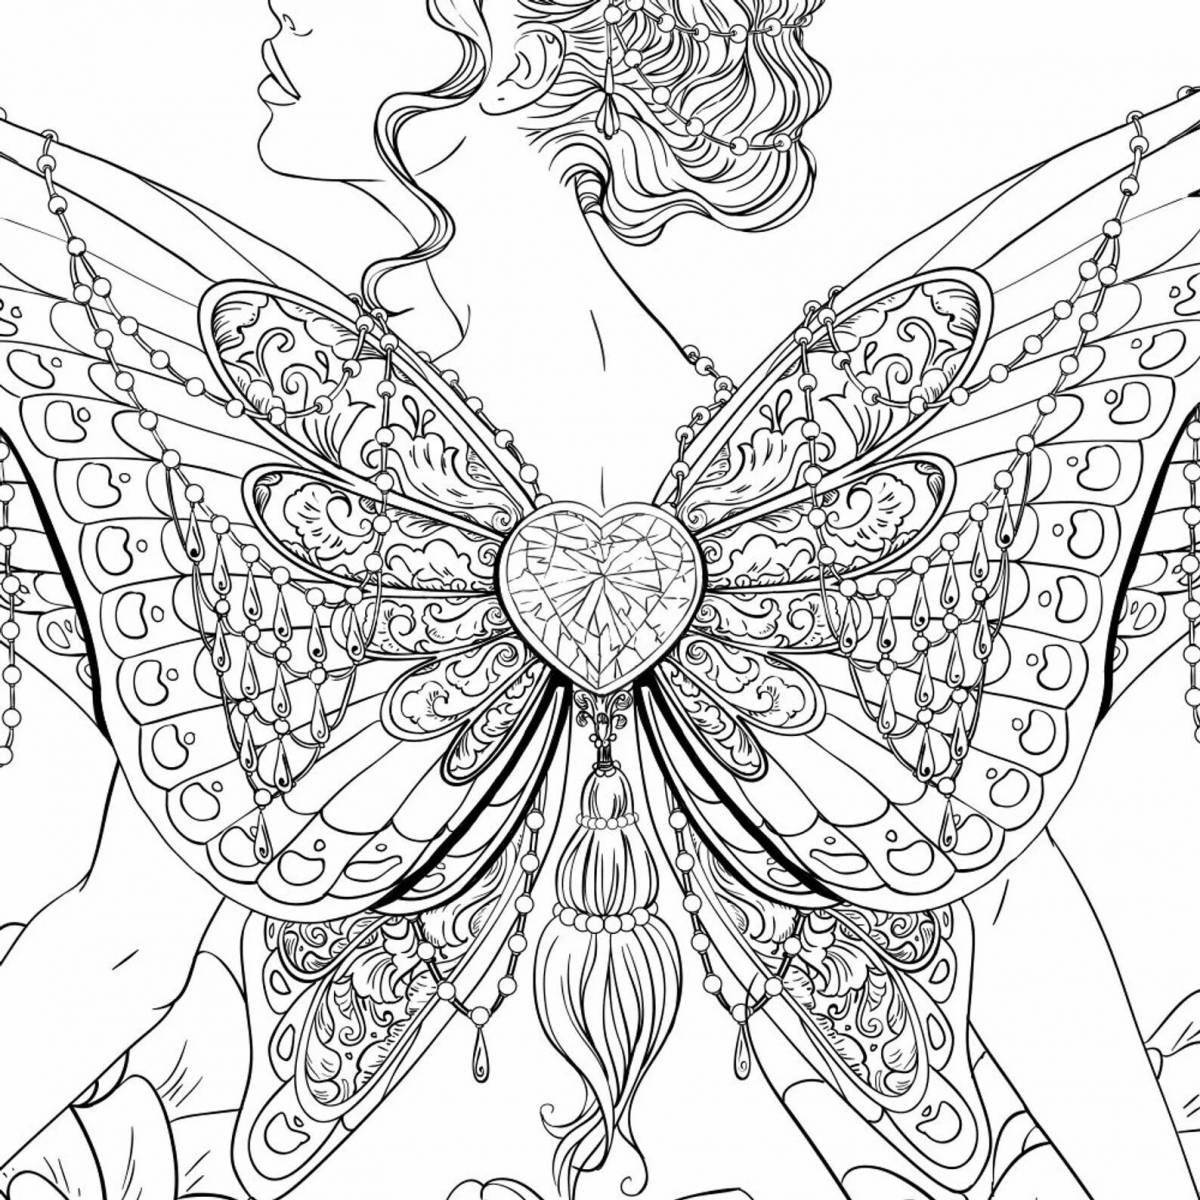 Fun coloring of the magical world of fairies